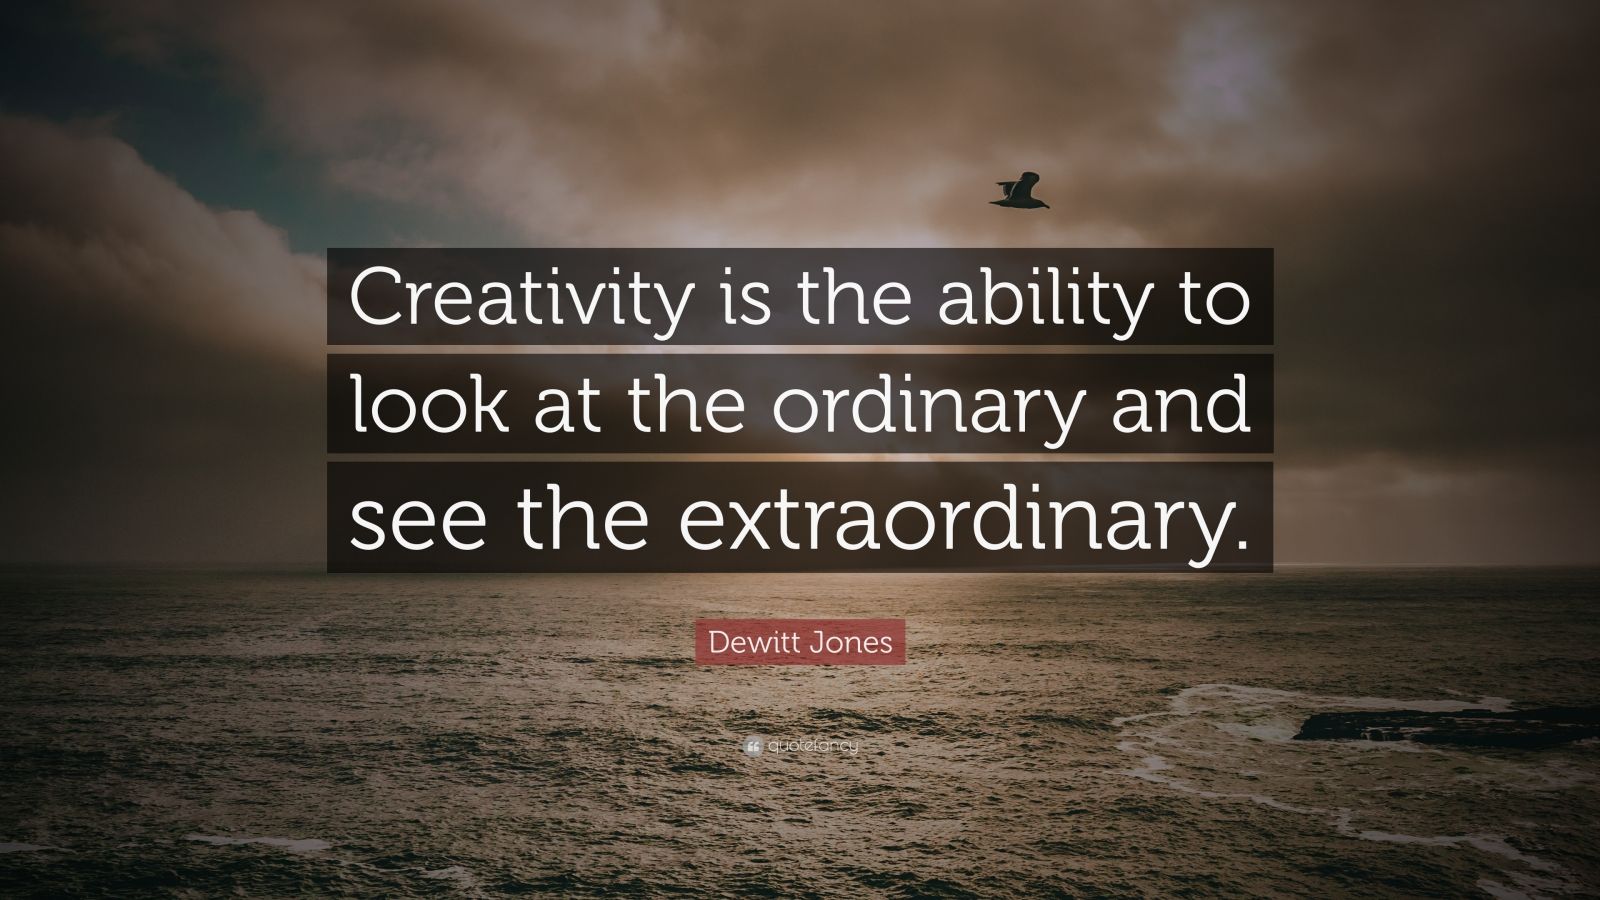 Dewitt Jones Quote: “Creativity is the ability to look at the ordinary